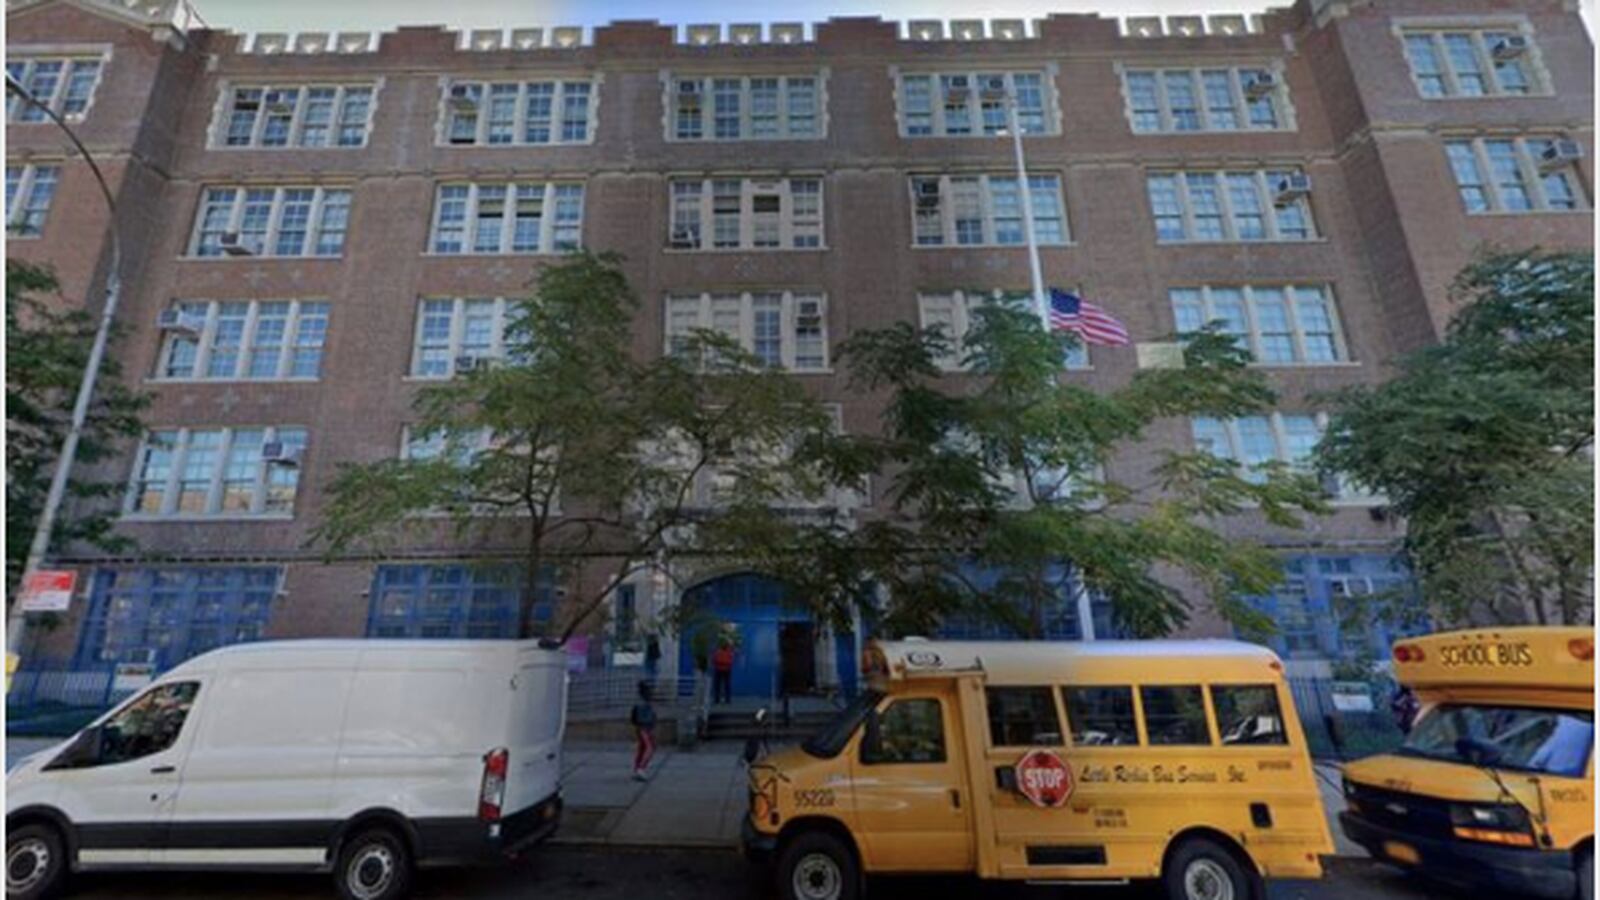 The Grace H Dodge Career and Technical High School in the North Bronx.